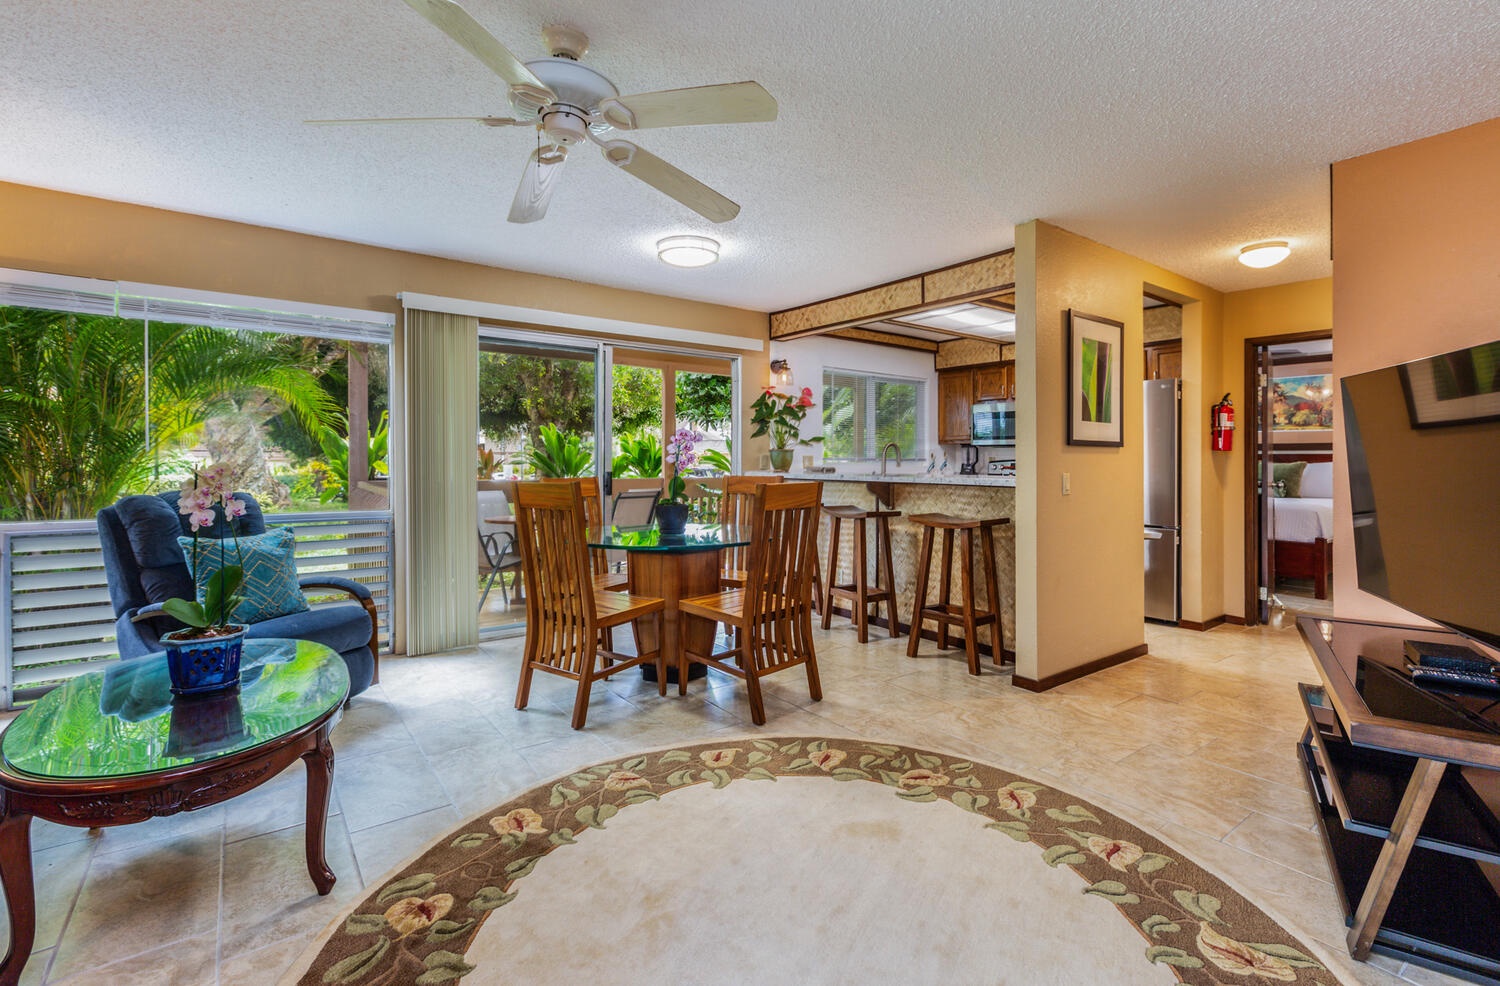 Princeville Vacation Rentals, Hideaway Haven - Experience seamless connection and bond with loved ones in our open-concept floorplan.